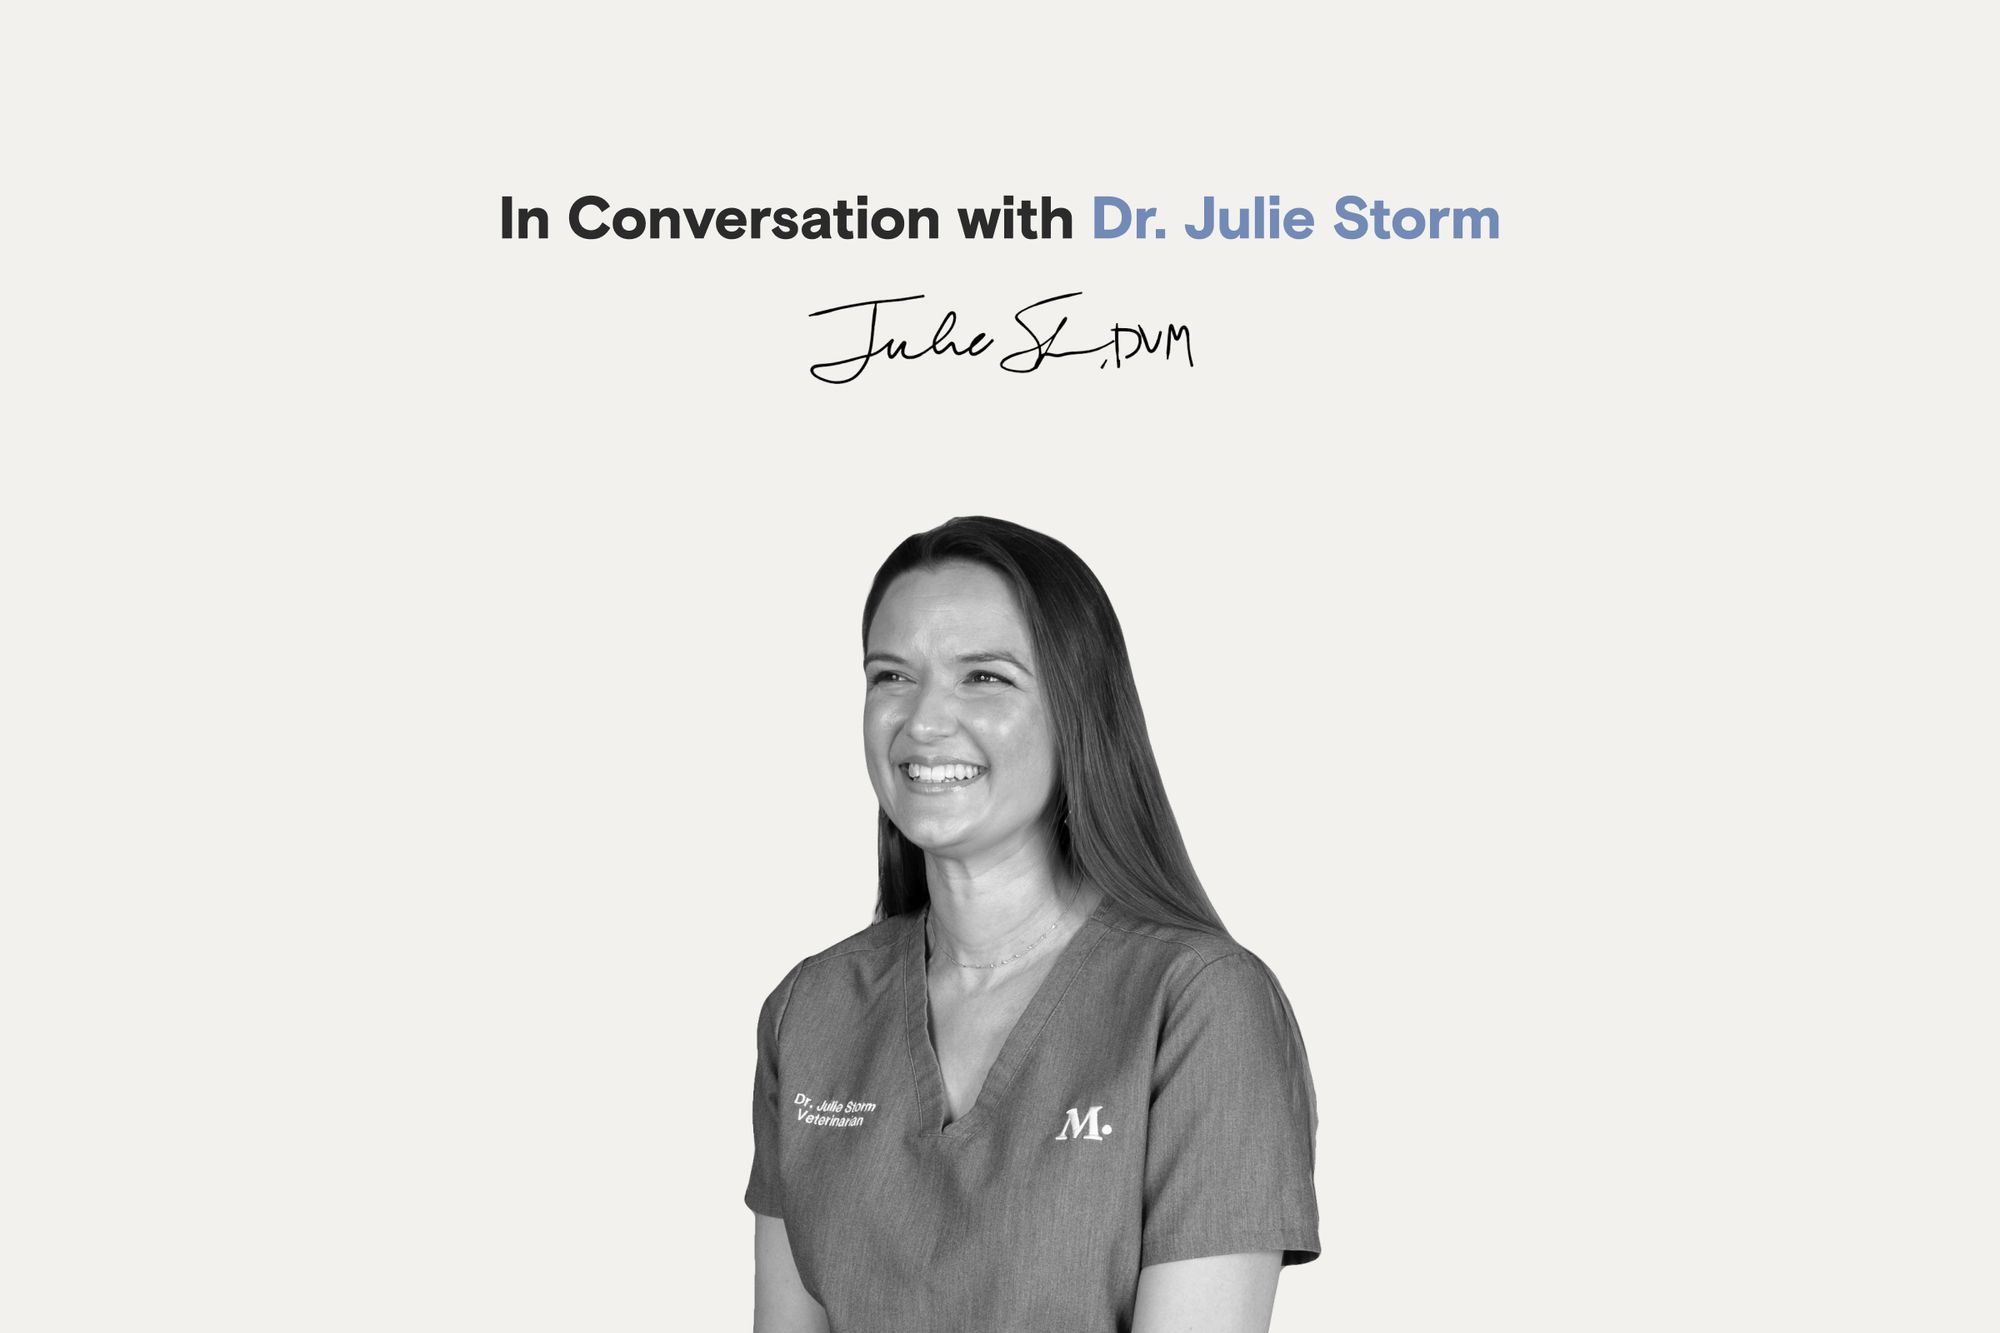 In Conversation with Dr. Julie Storm